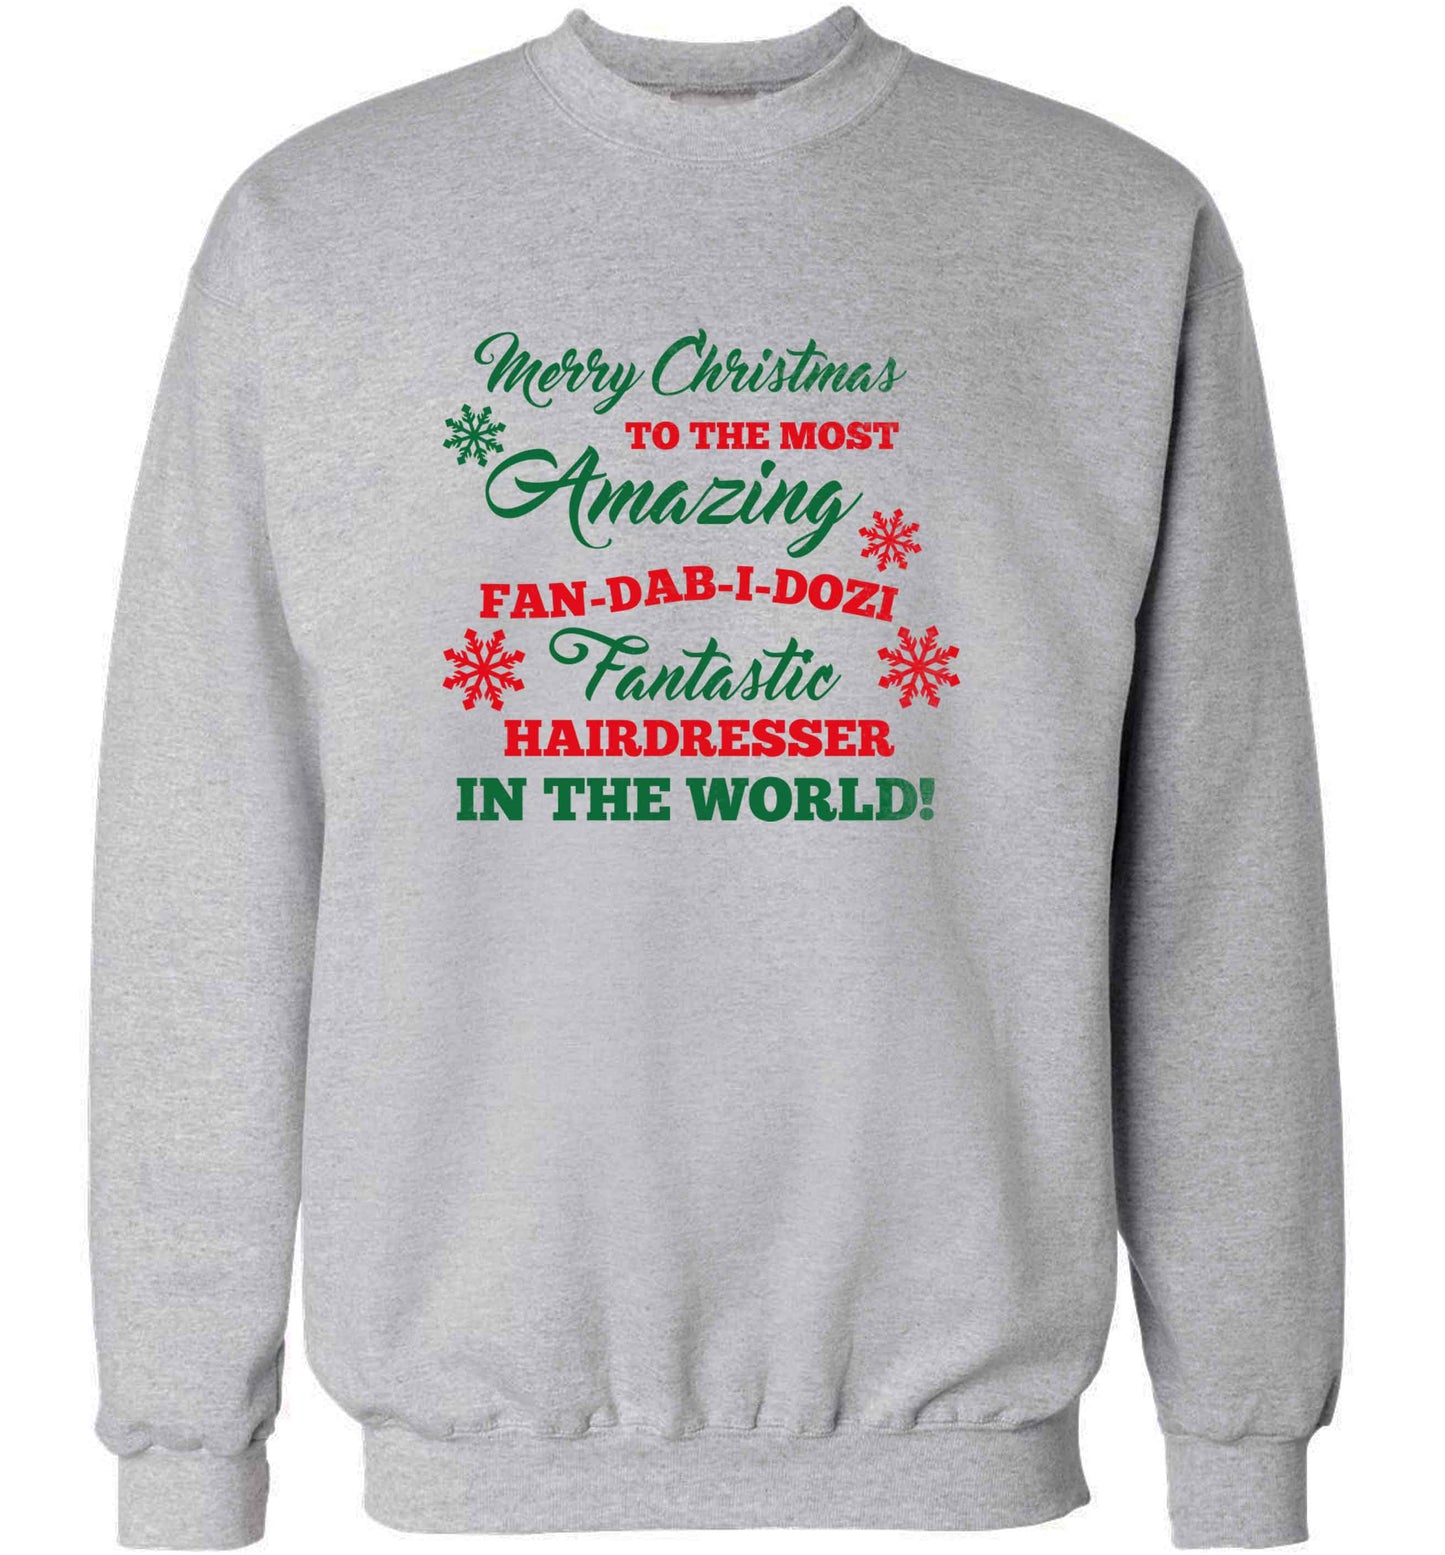 Merry Christmas to the most amazing dental assistant in the world! adult's unisex grey sweater 2XL